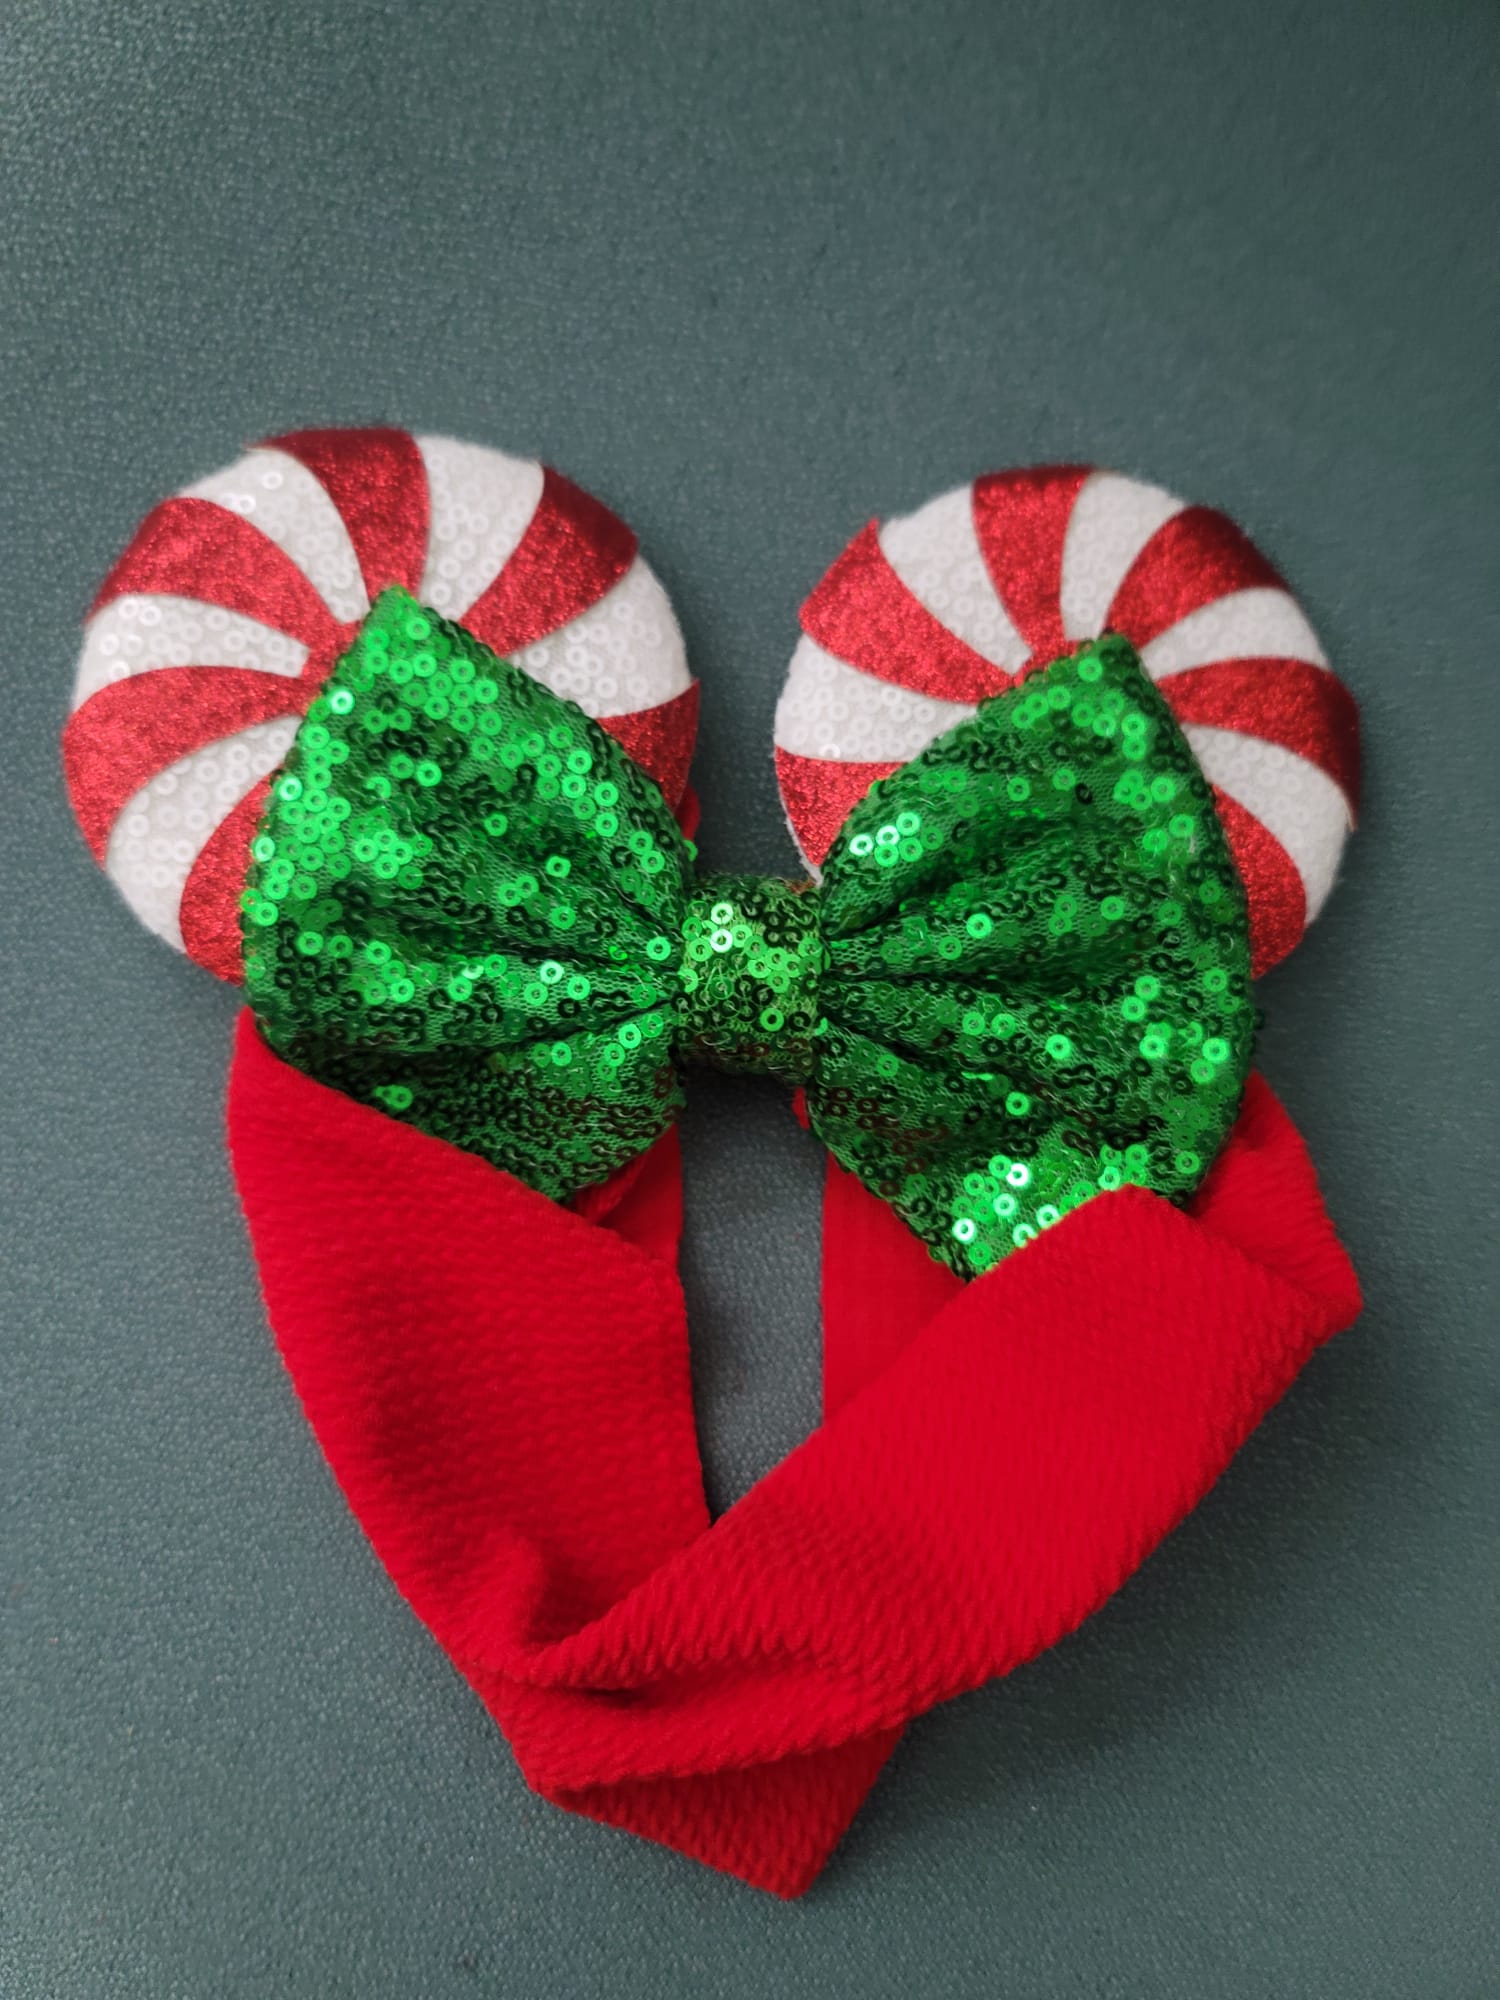 Minnie Mouse PGreen Bow Swirl Candy Ears newworldofwatces